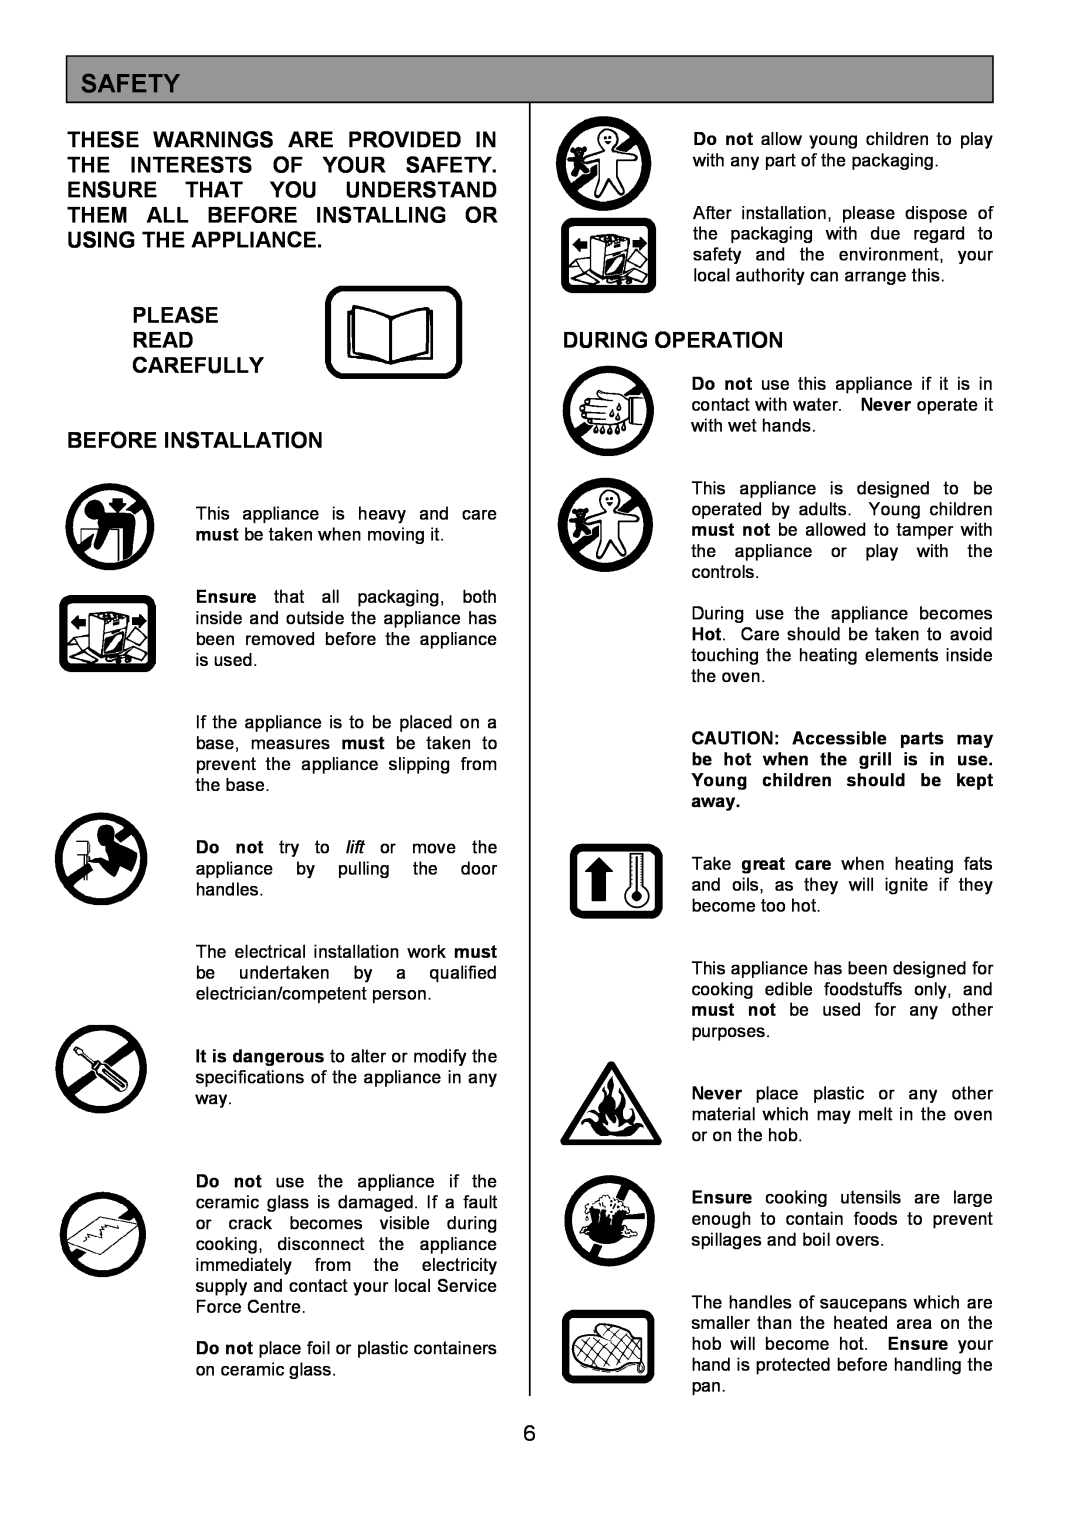 Tricity Bendix SIE533 installation instructions Safety, Please Read Carefully Before Installation, During Operation 